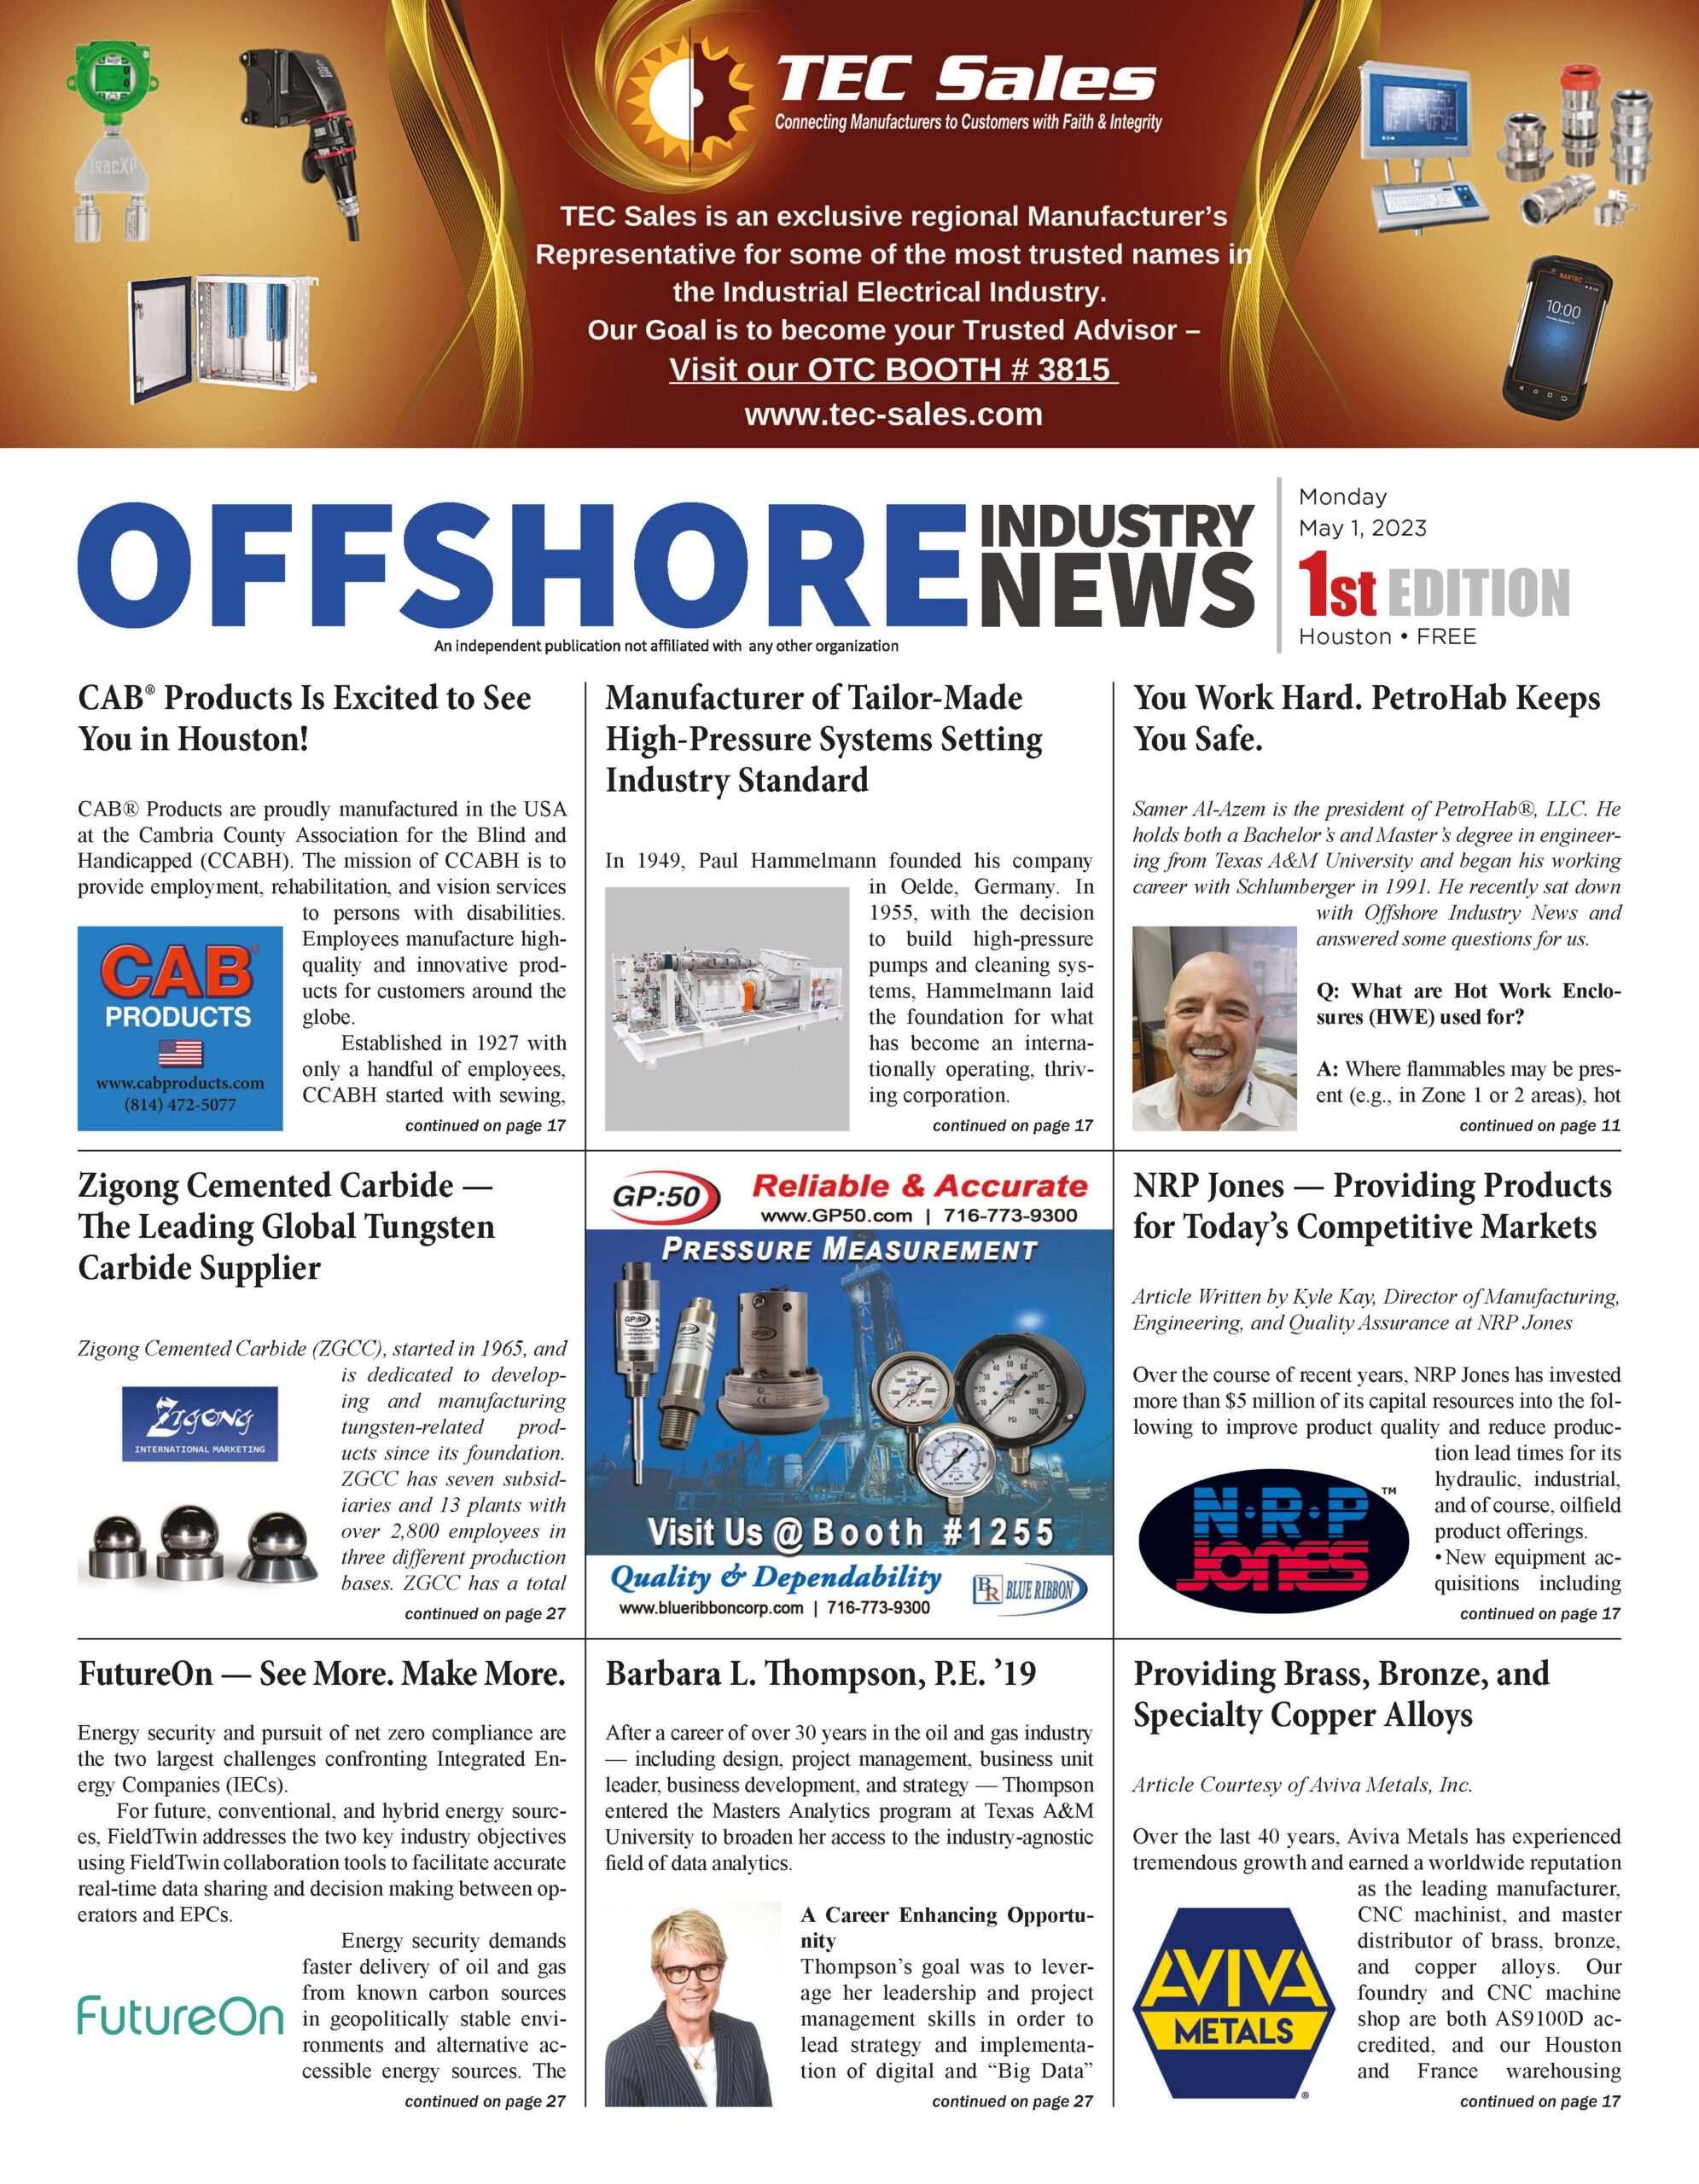 Offshore Industry News